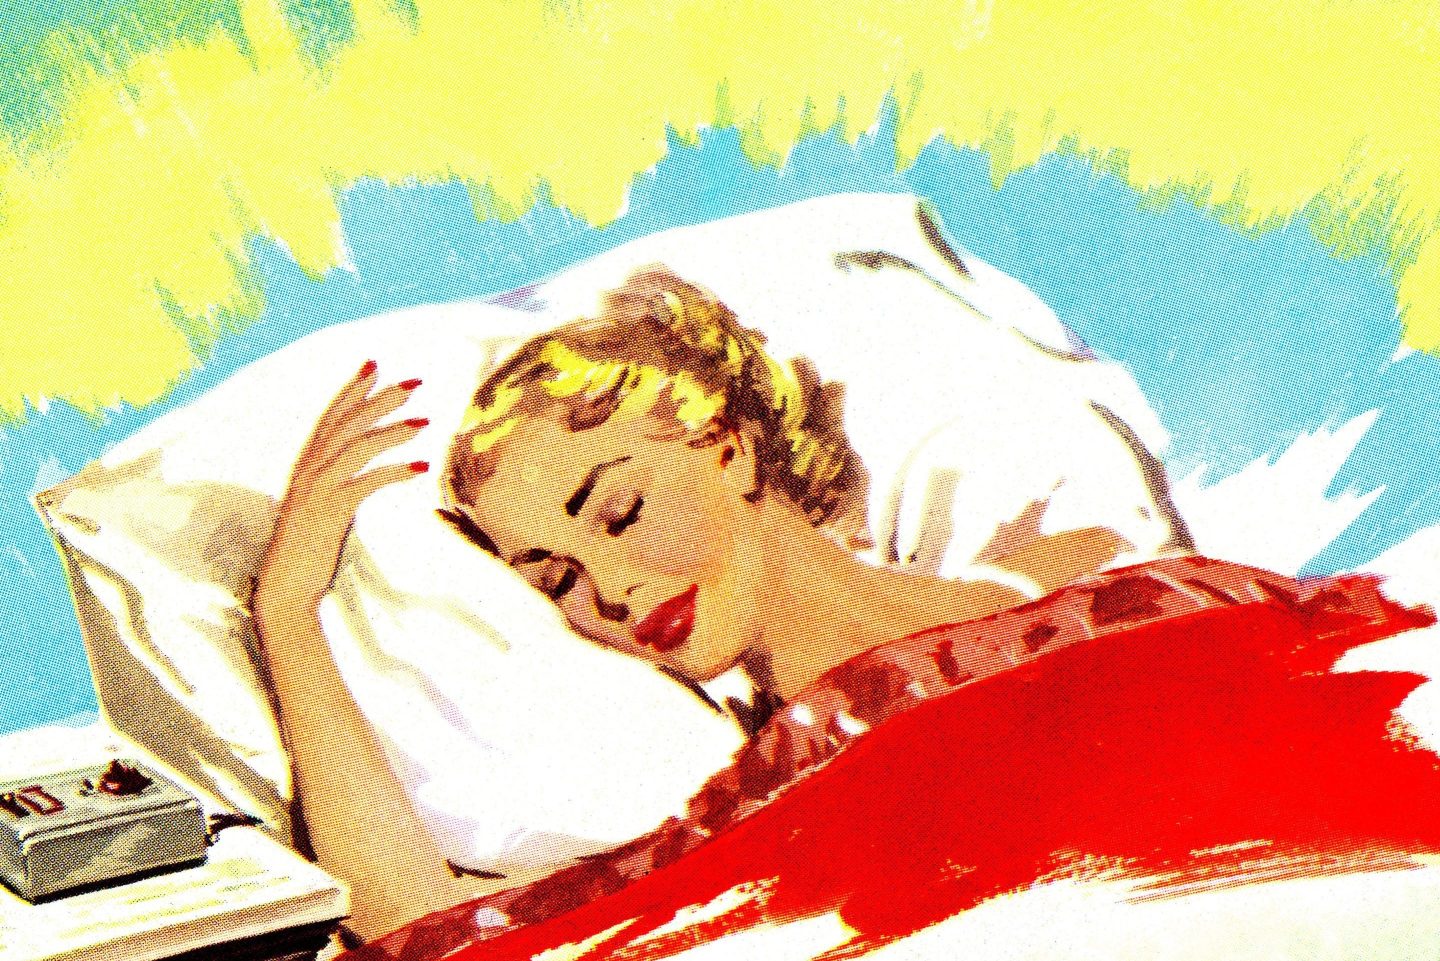 Painting of woman sleeping in bed